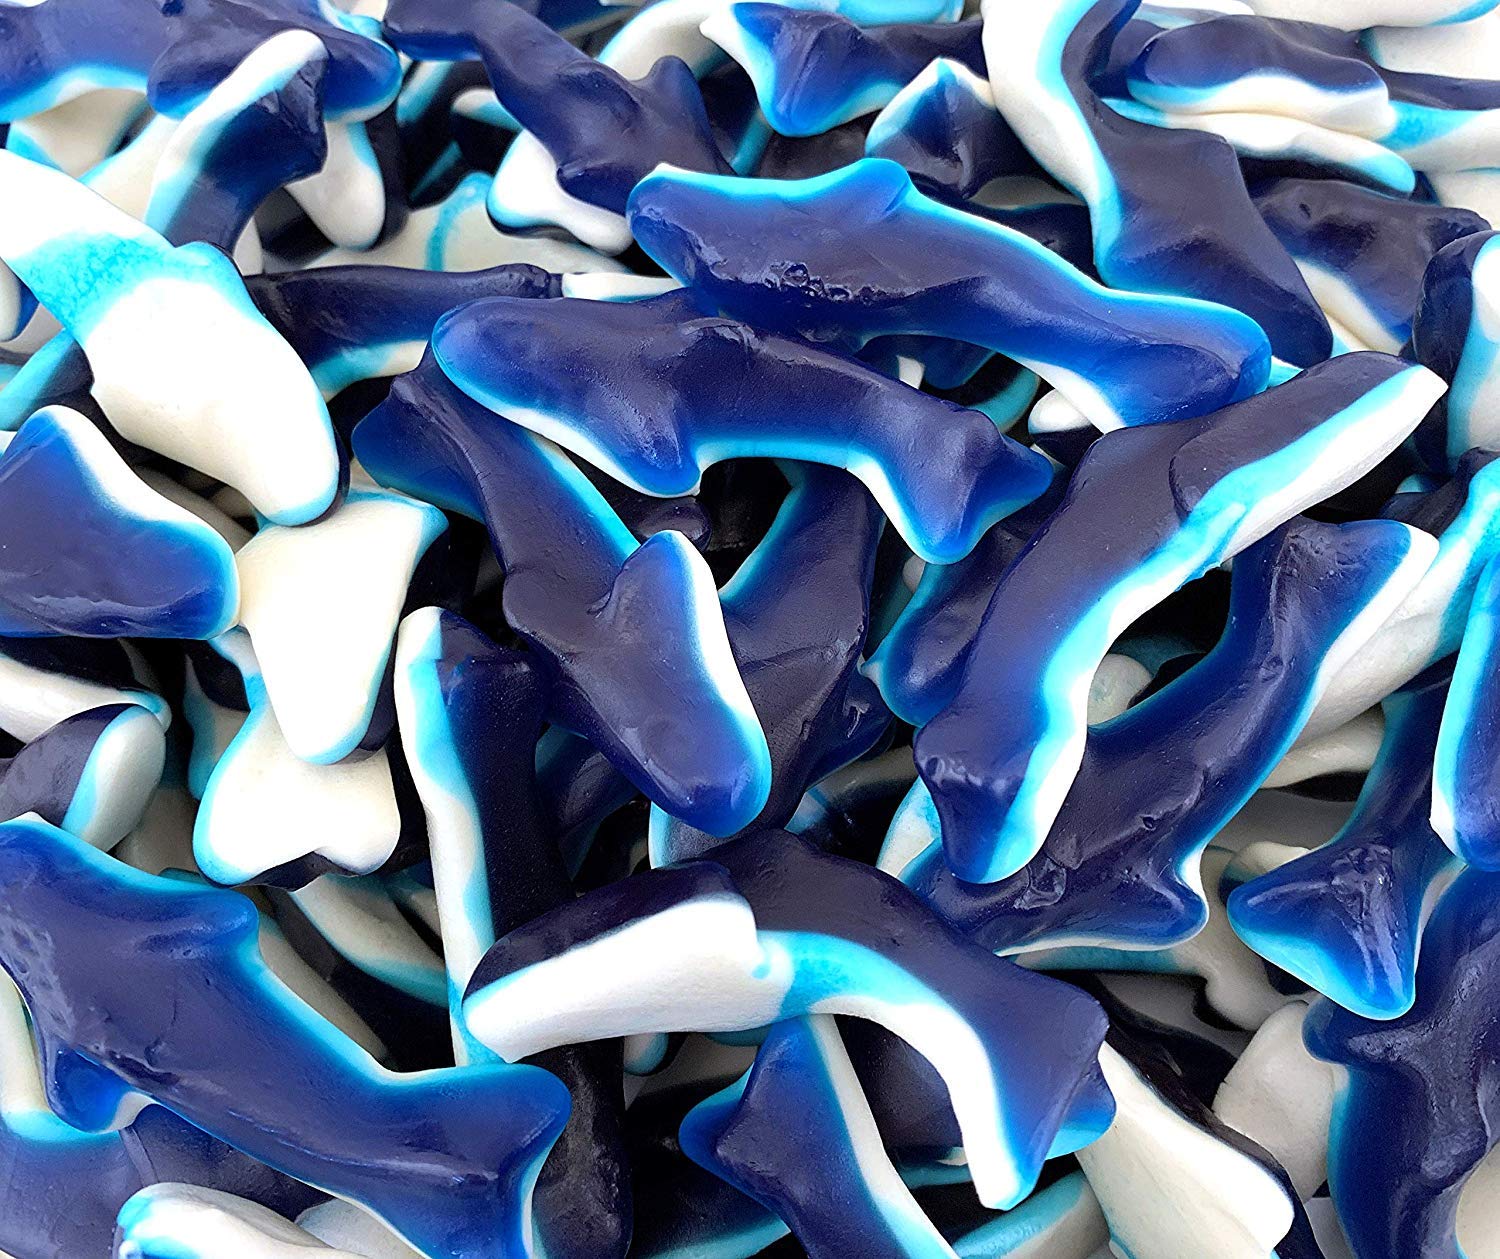 Sunny Island Bulk - Blue Baby Sharks Gummy Candy, Made with Real Fruit Juice, 2 Pounds Bag